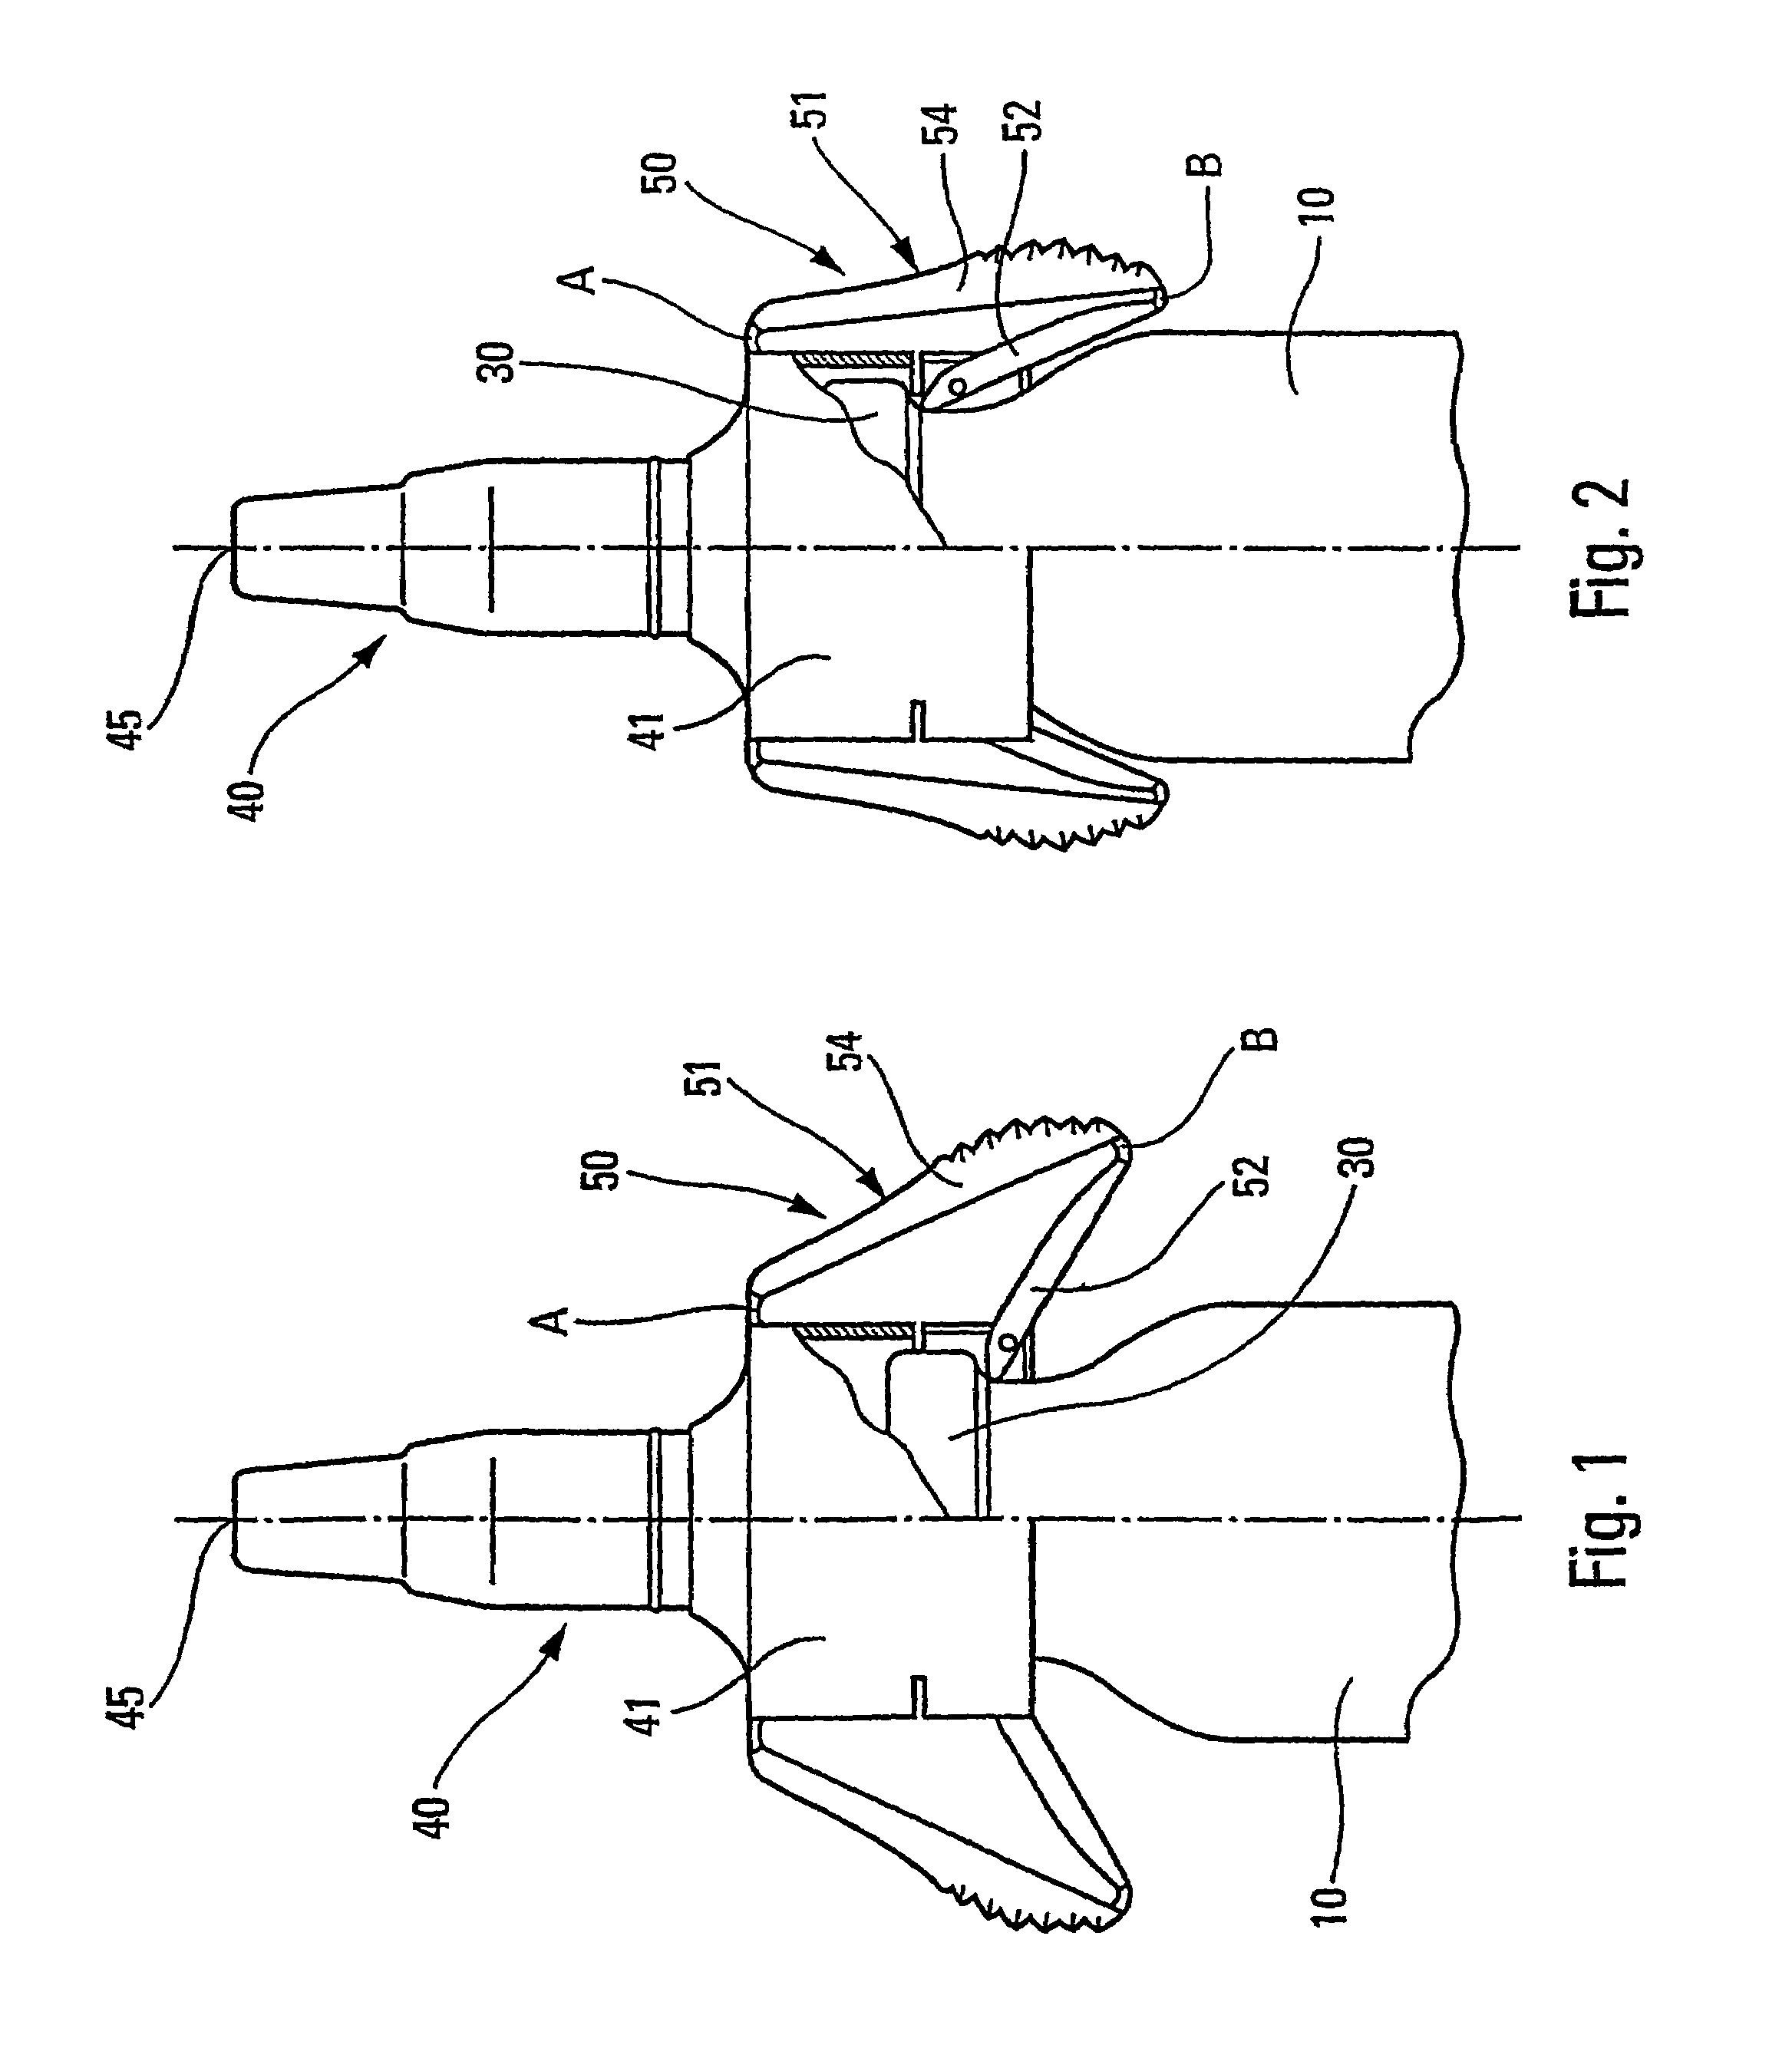 Atomization device with lateral actuation